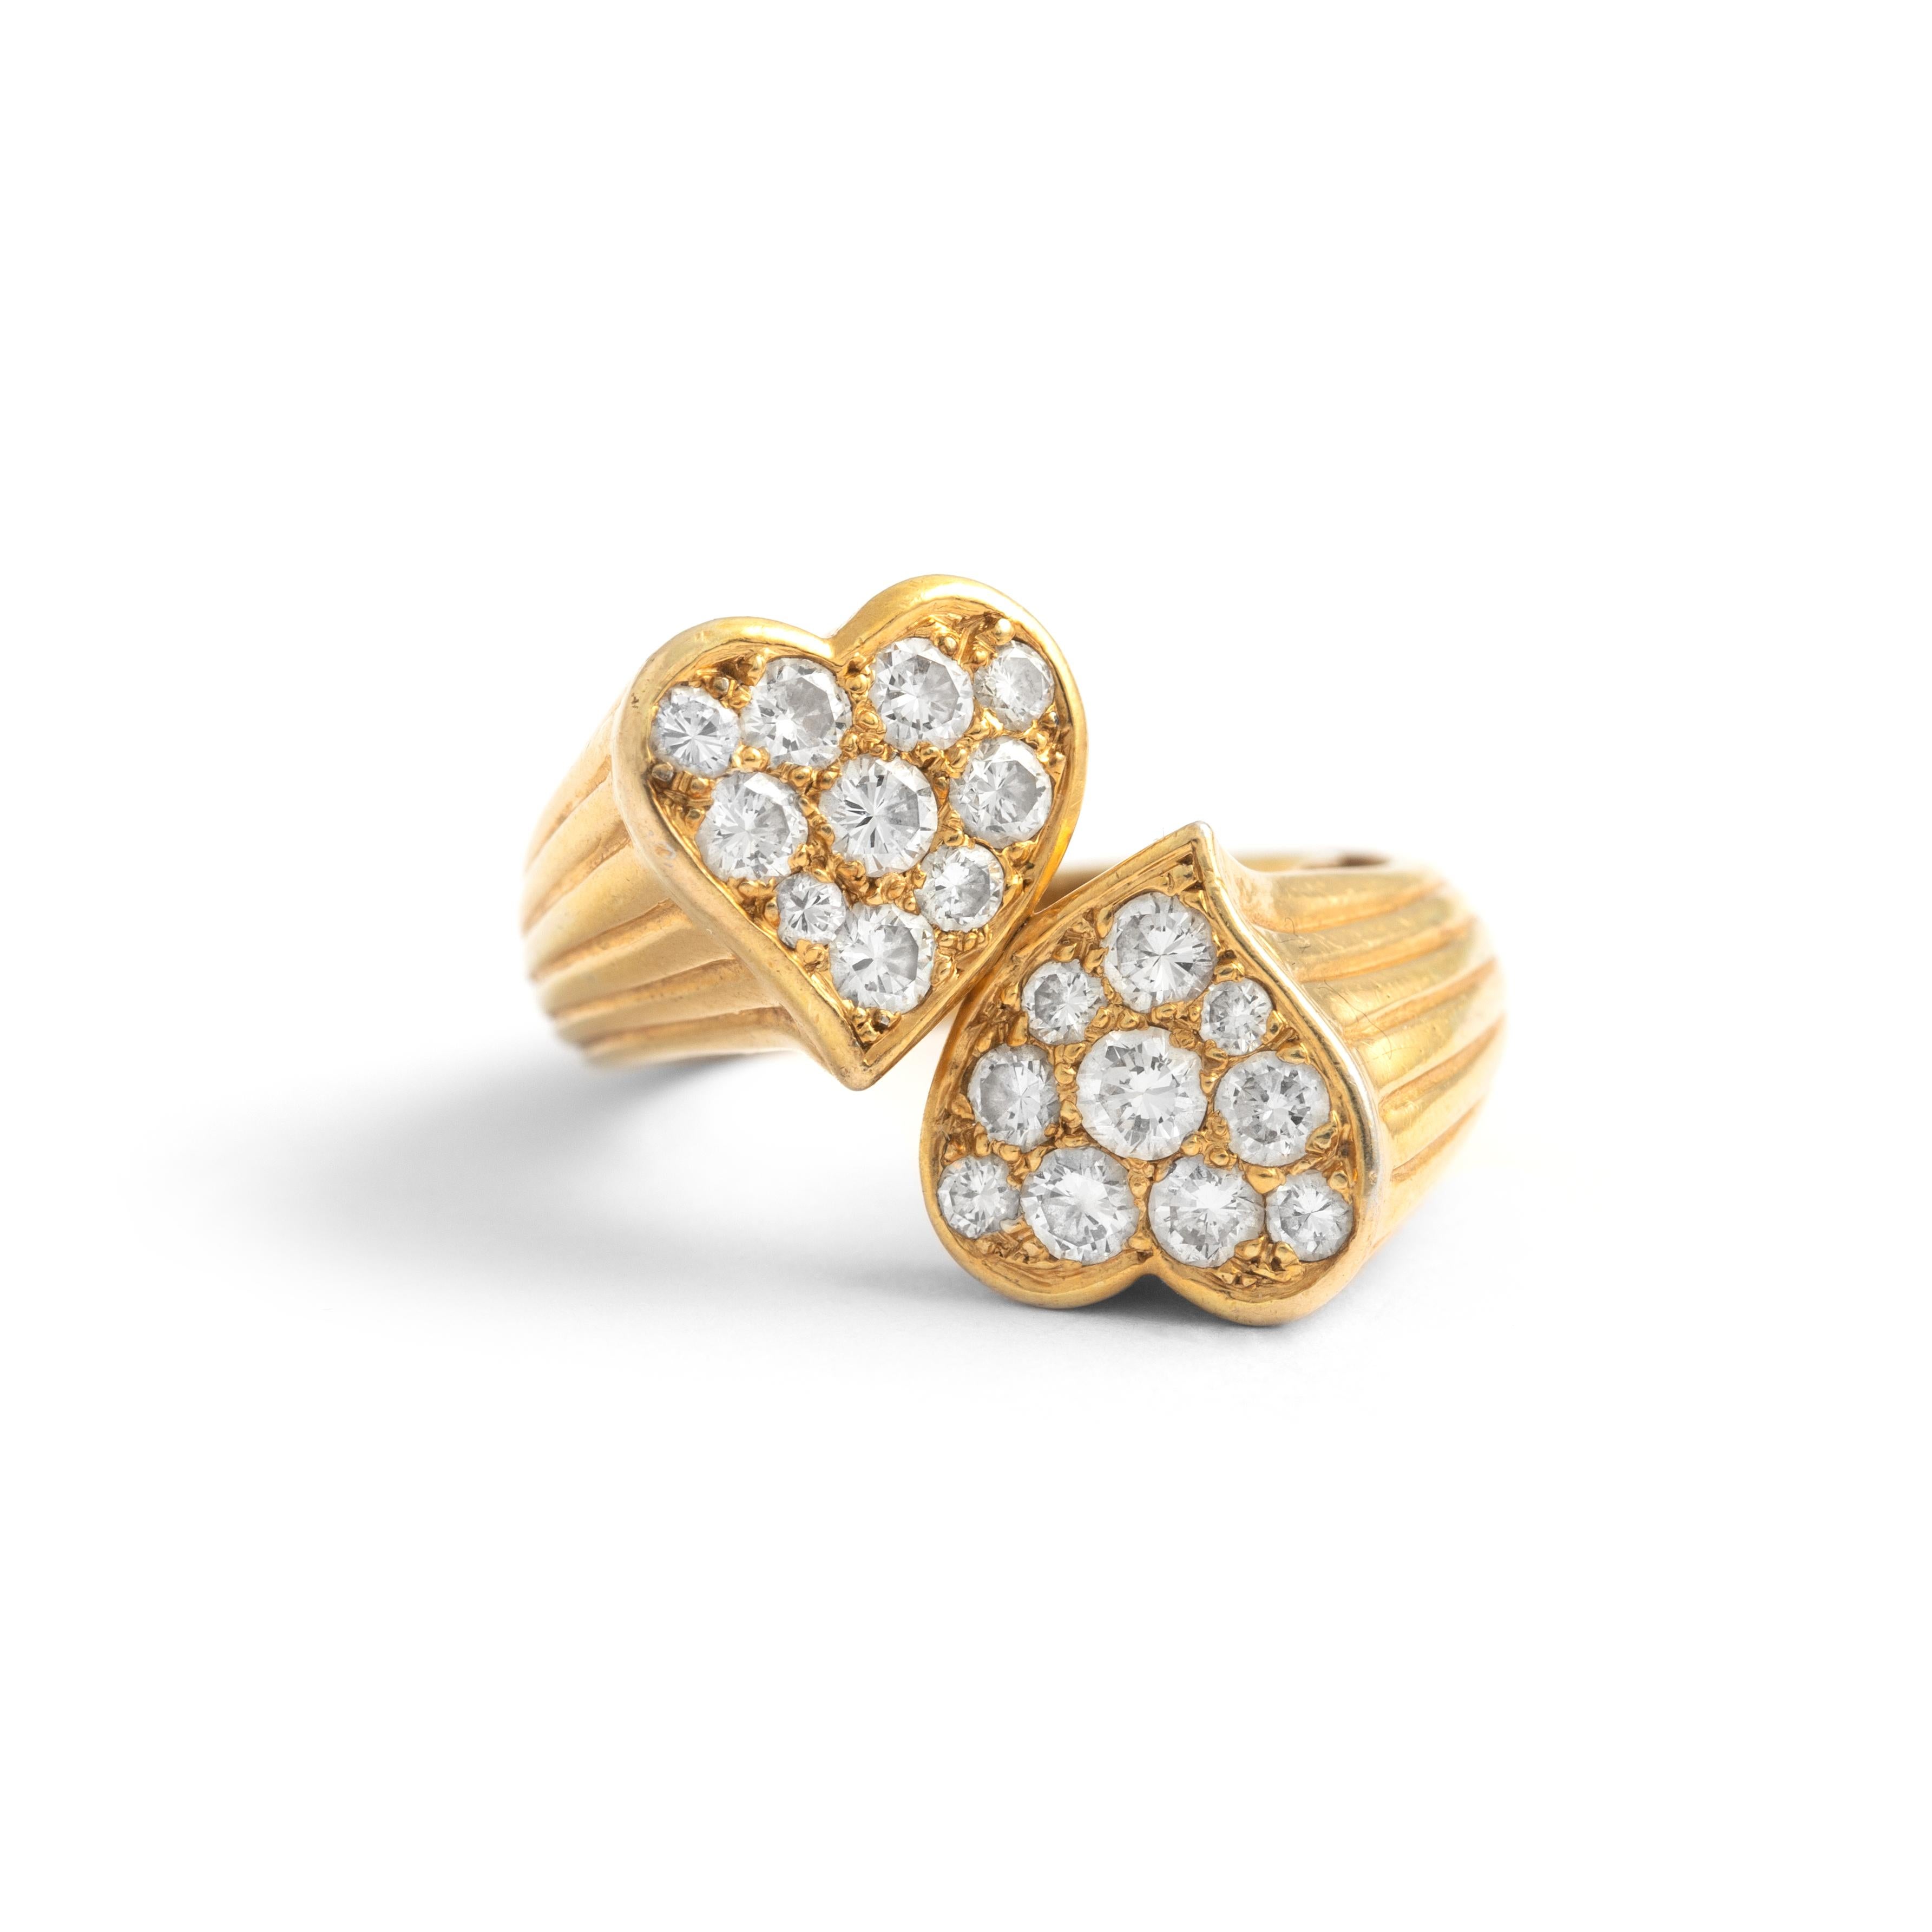 Diamond Yellow Gold 18K Two Hearts Crossover Ring.
Height Heart motif: approx. 1.60 centimeters.
Size: 47.
Weight: 10.17 grams


